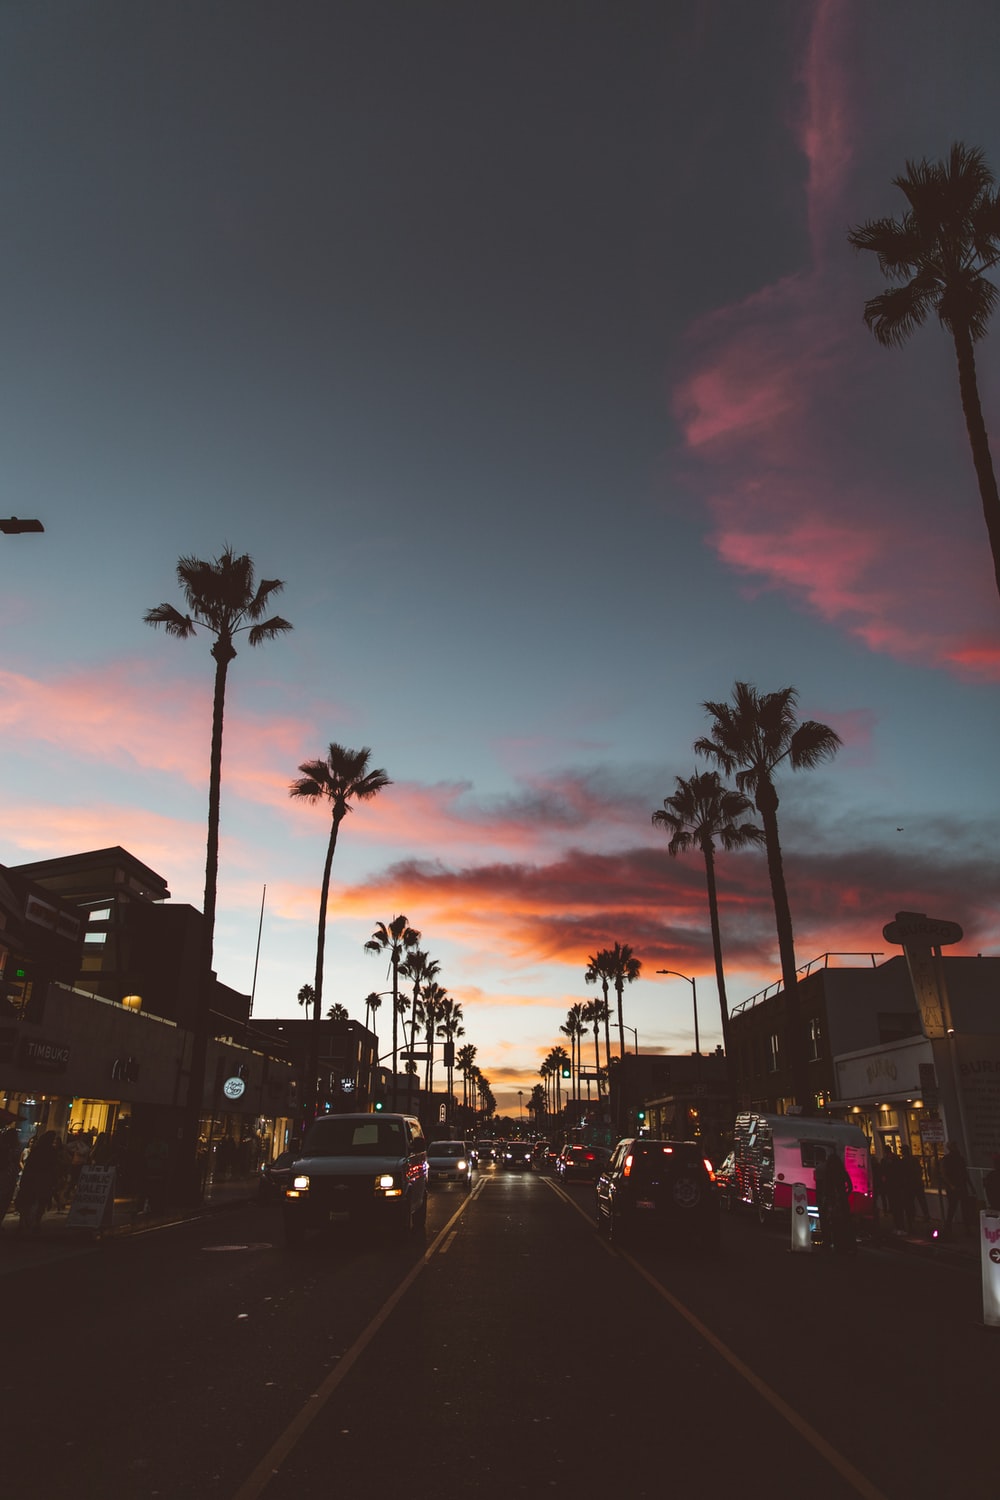 Los Angeles Sunset Picture. Download Free Image